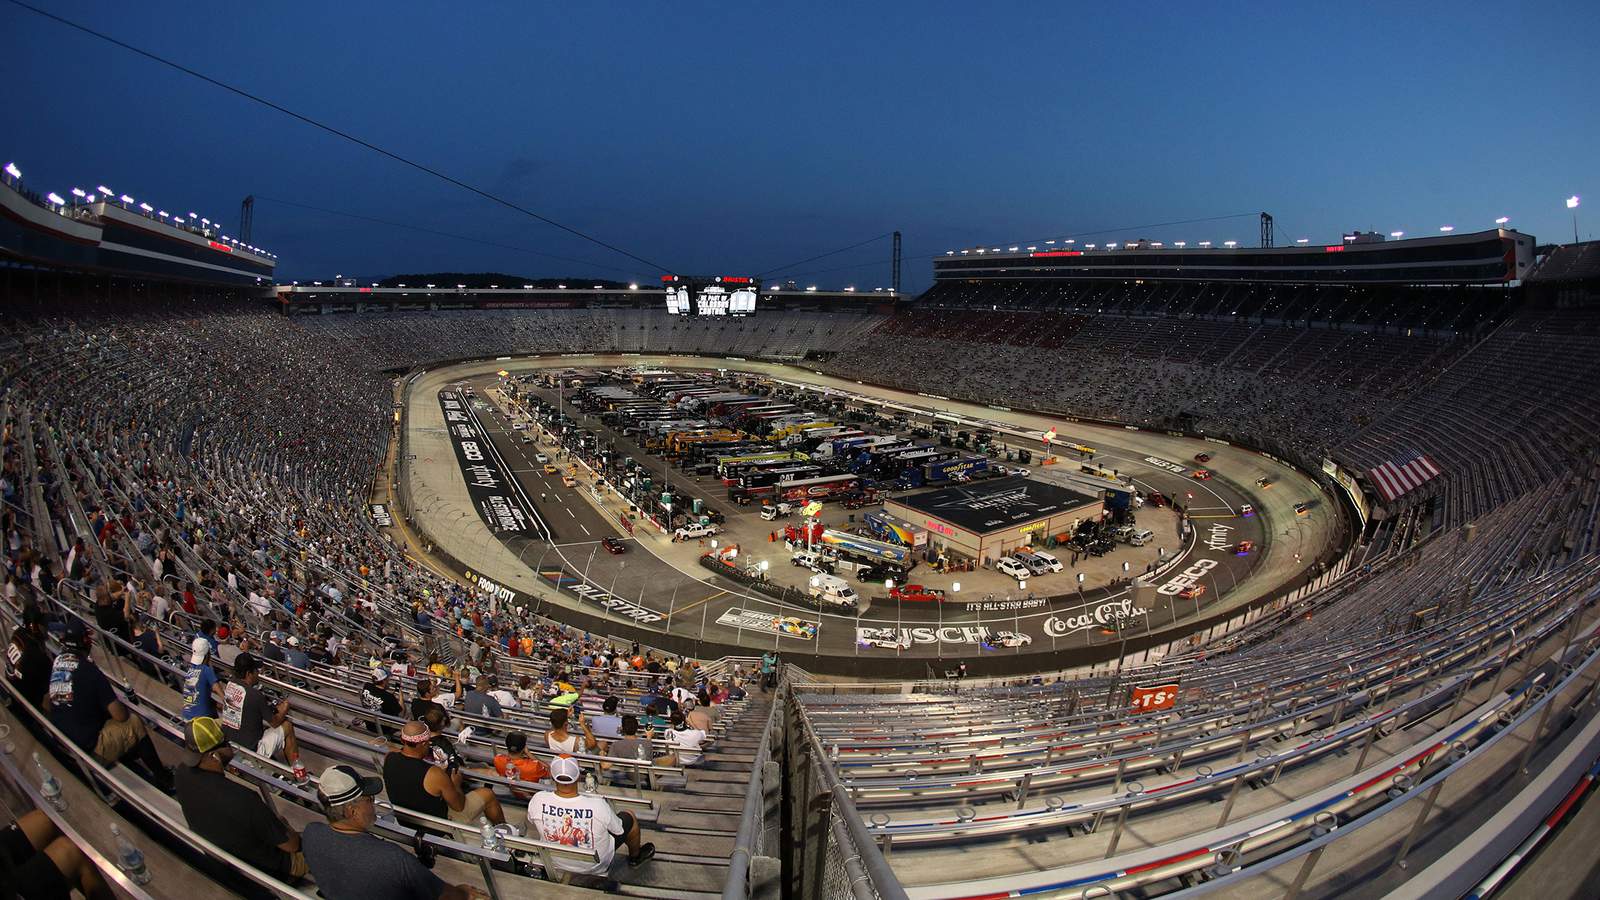 Two weeks after NASCAR All-Star Race, 0 coronavirus cases linked to event